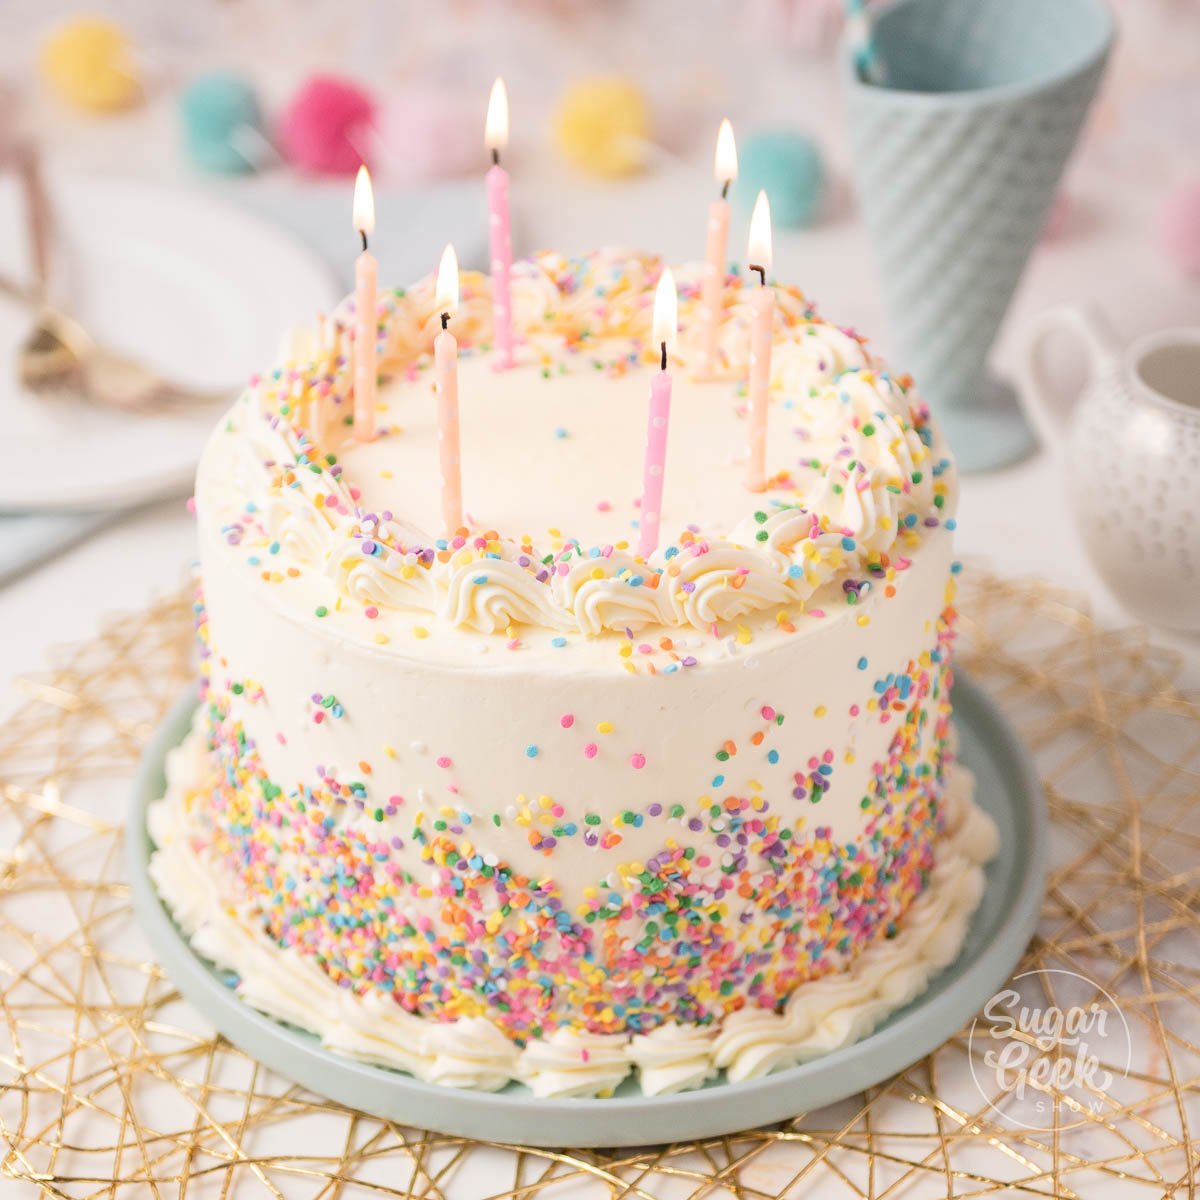 Decorated Birthday cake with candles.